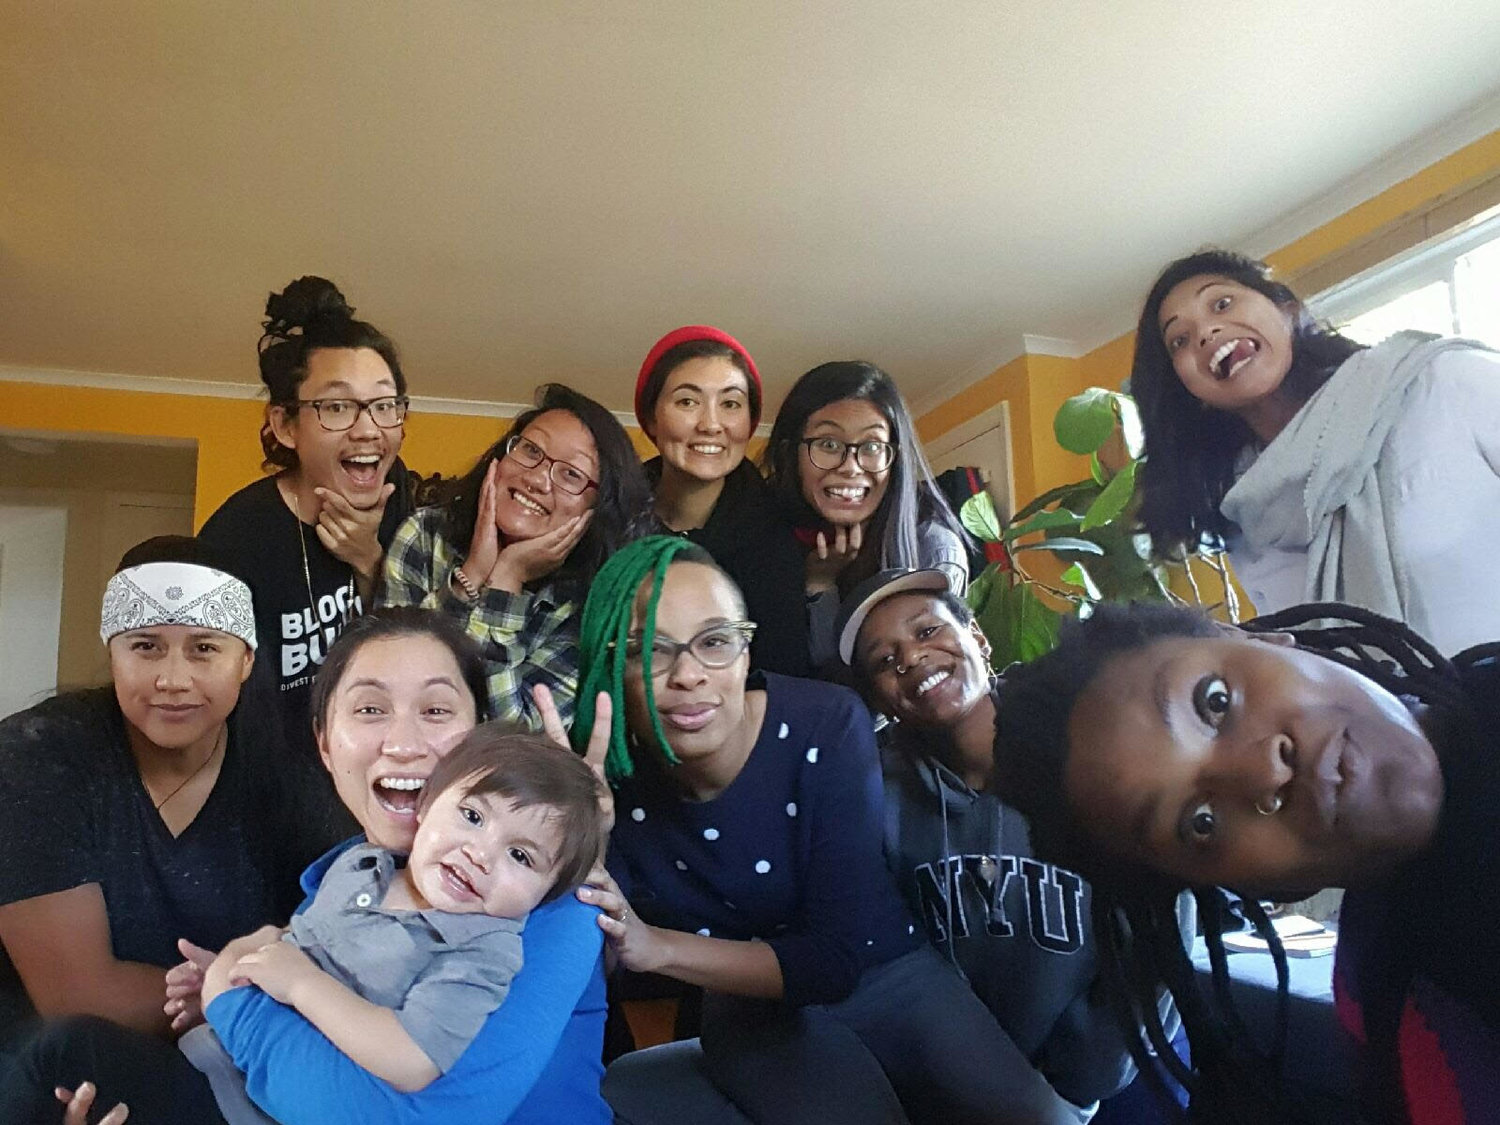 group photo of eleven people of color in a house, smiling and laughing